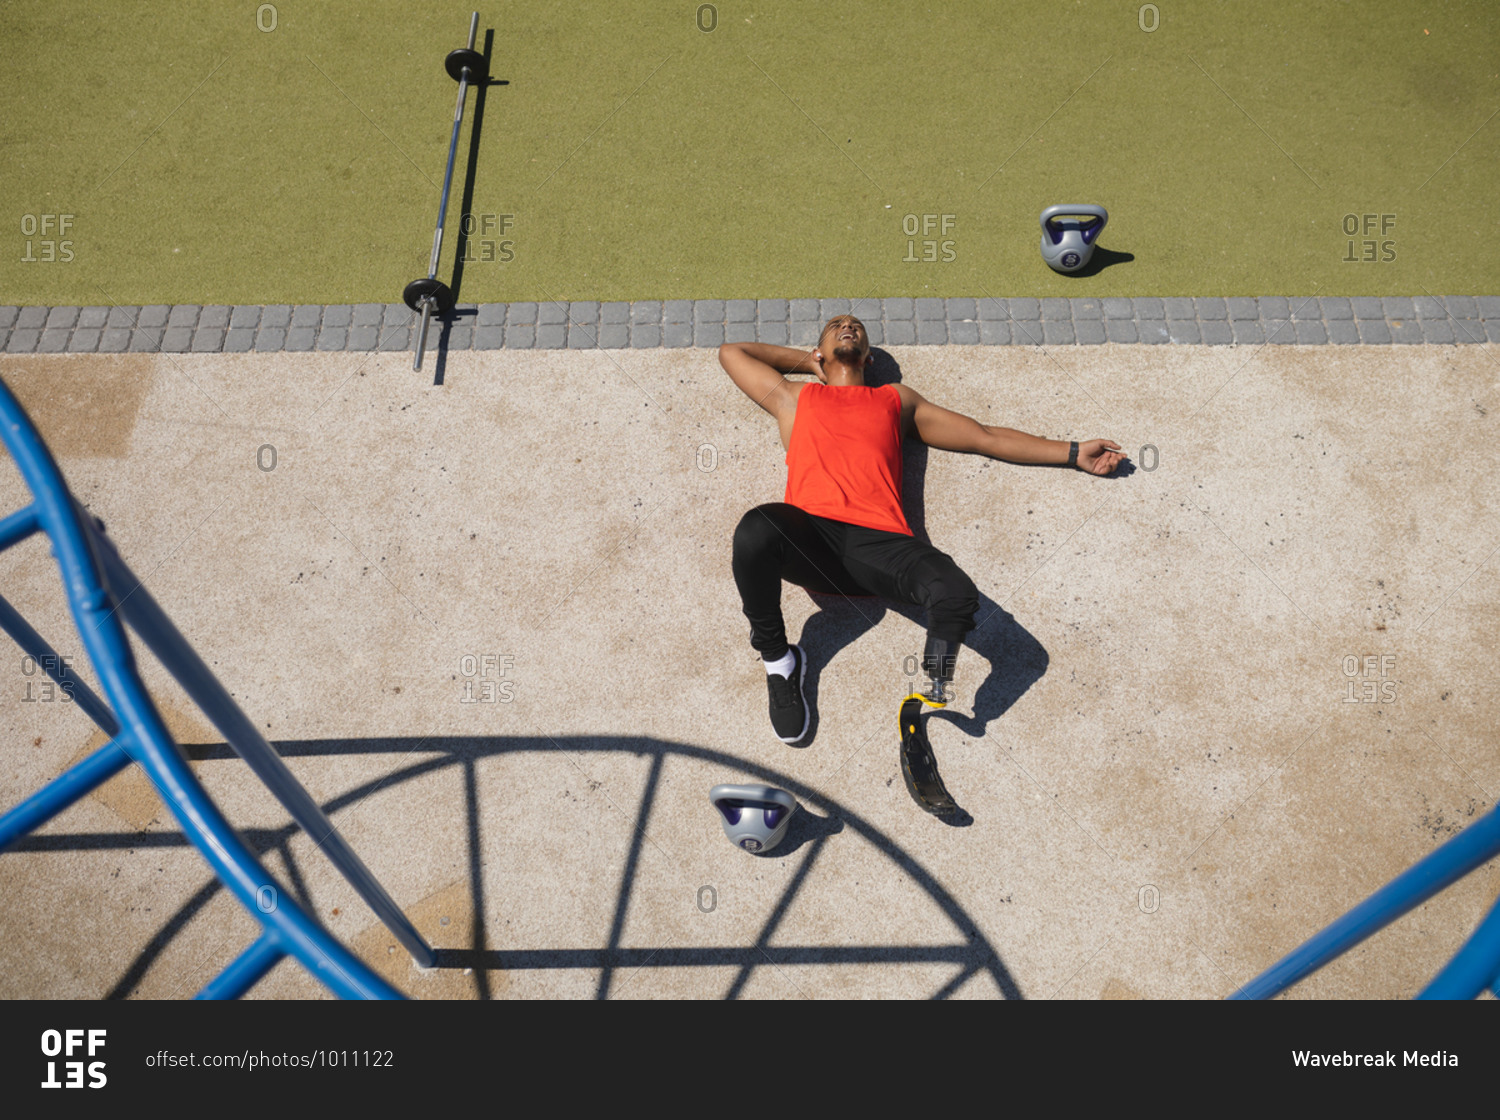 High angle view of disabled mixed race man with a prosthetic running blade working out at outdoor gym wearing wireless earphones, taking a rest lying on his back. Fitness disability healthy lifestyle.